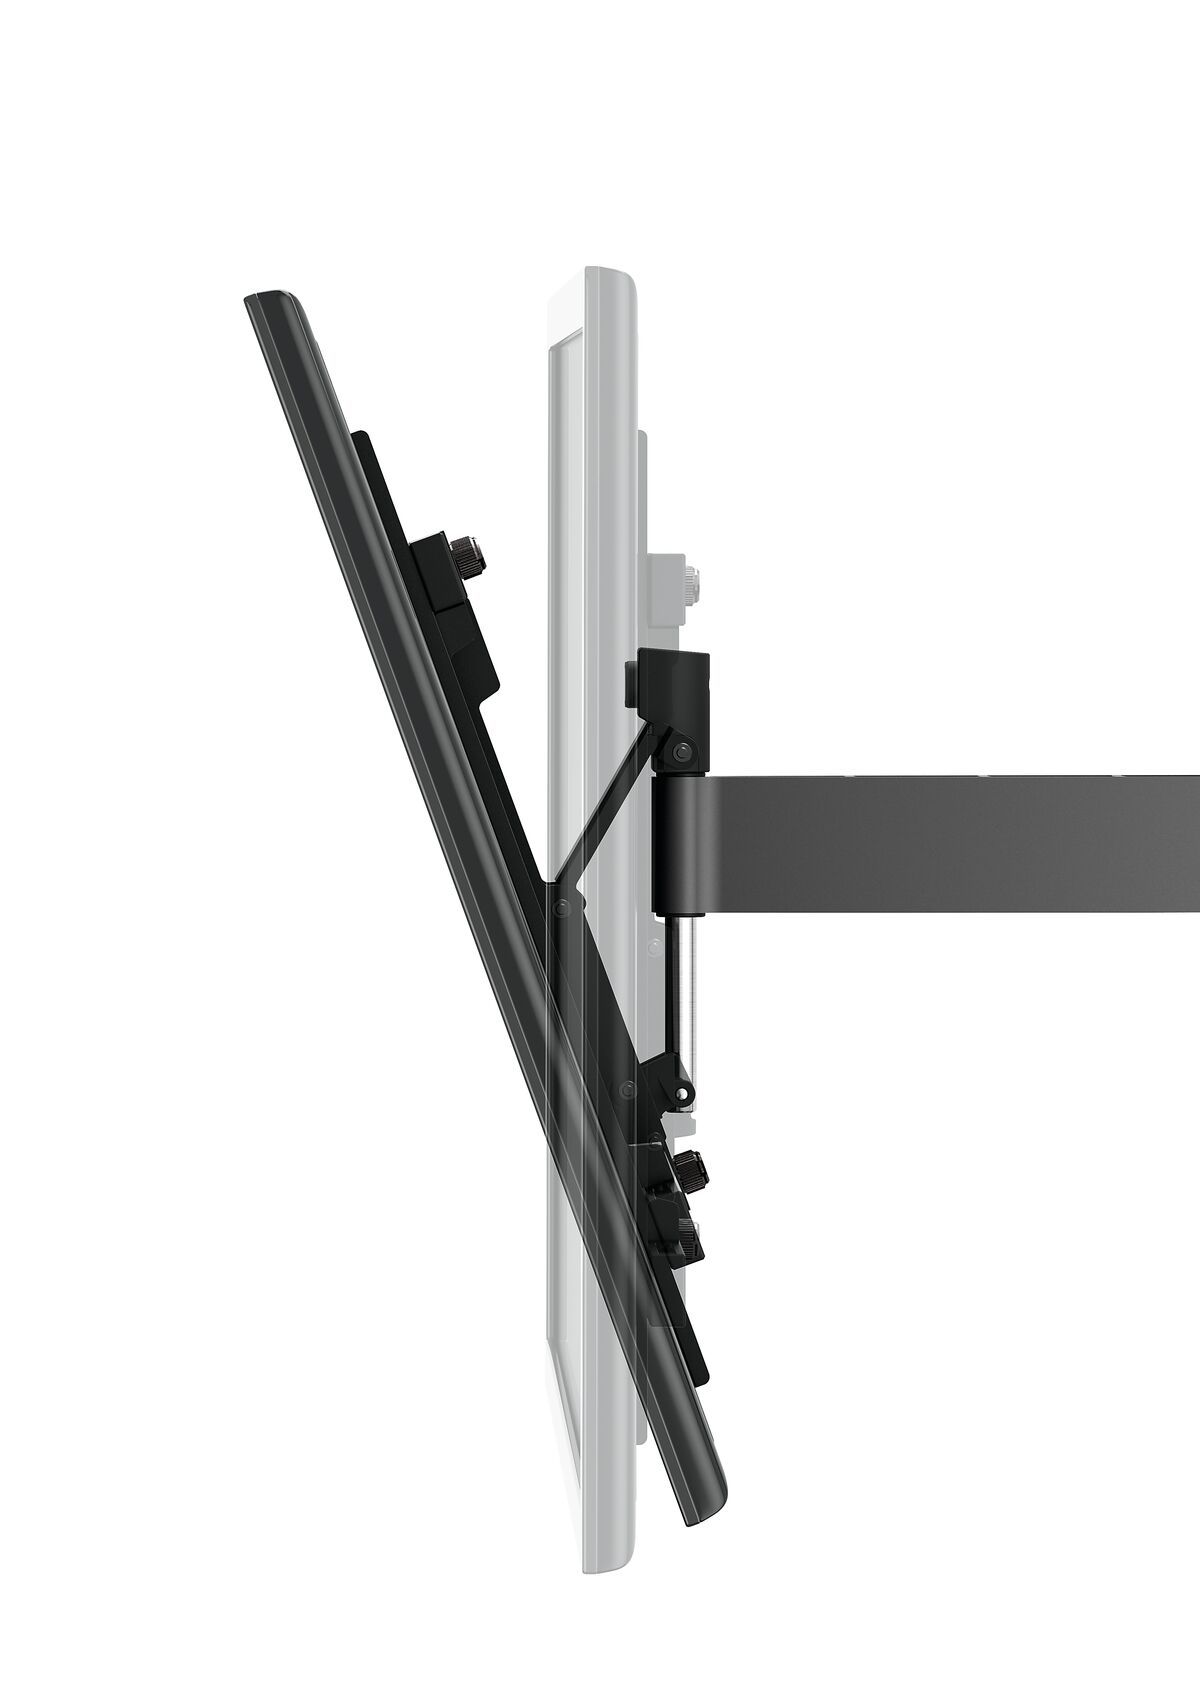 Vogel's WALL 2225 Full-Motion TV Wall Mount (black) - Suitable for 32 up to 55 inch TVs - Motion (up to 120°) - Tilt up to 20° - Detail